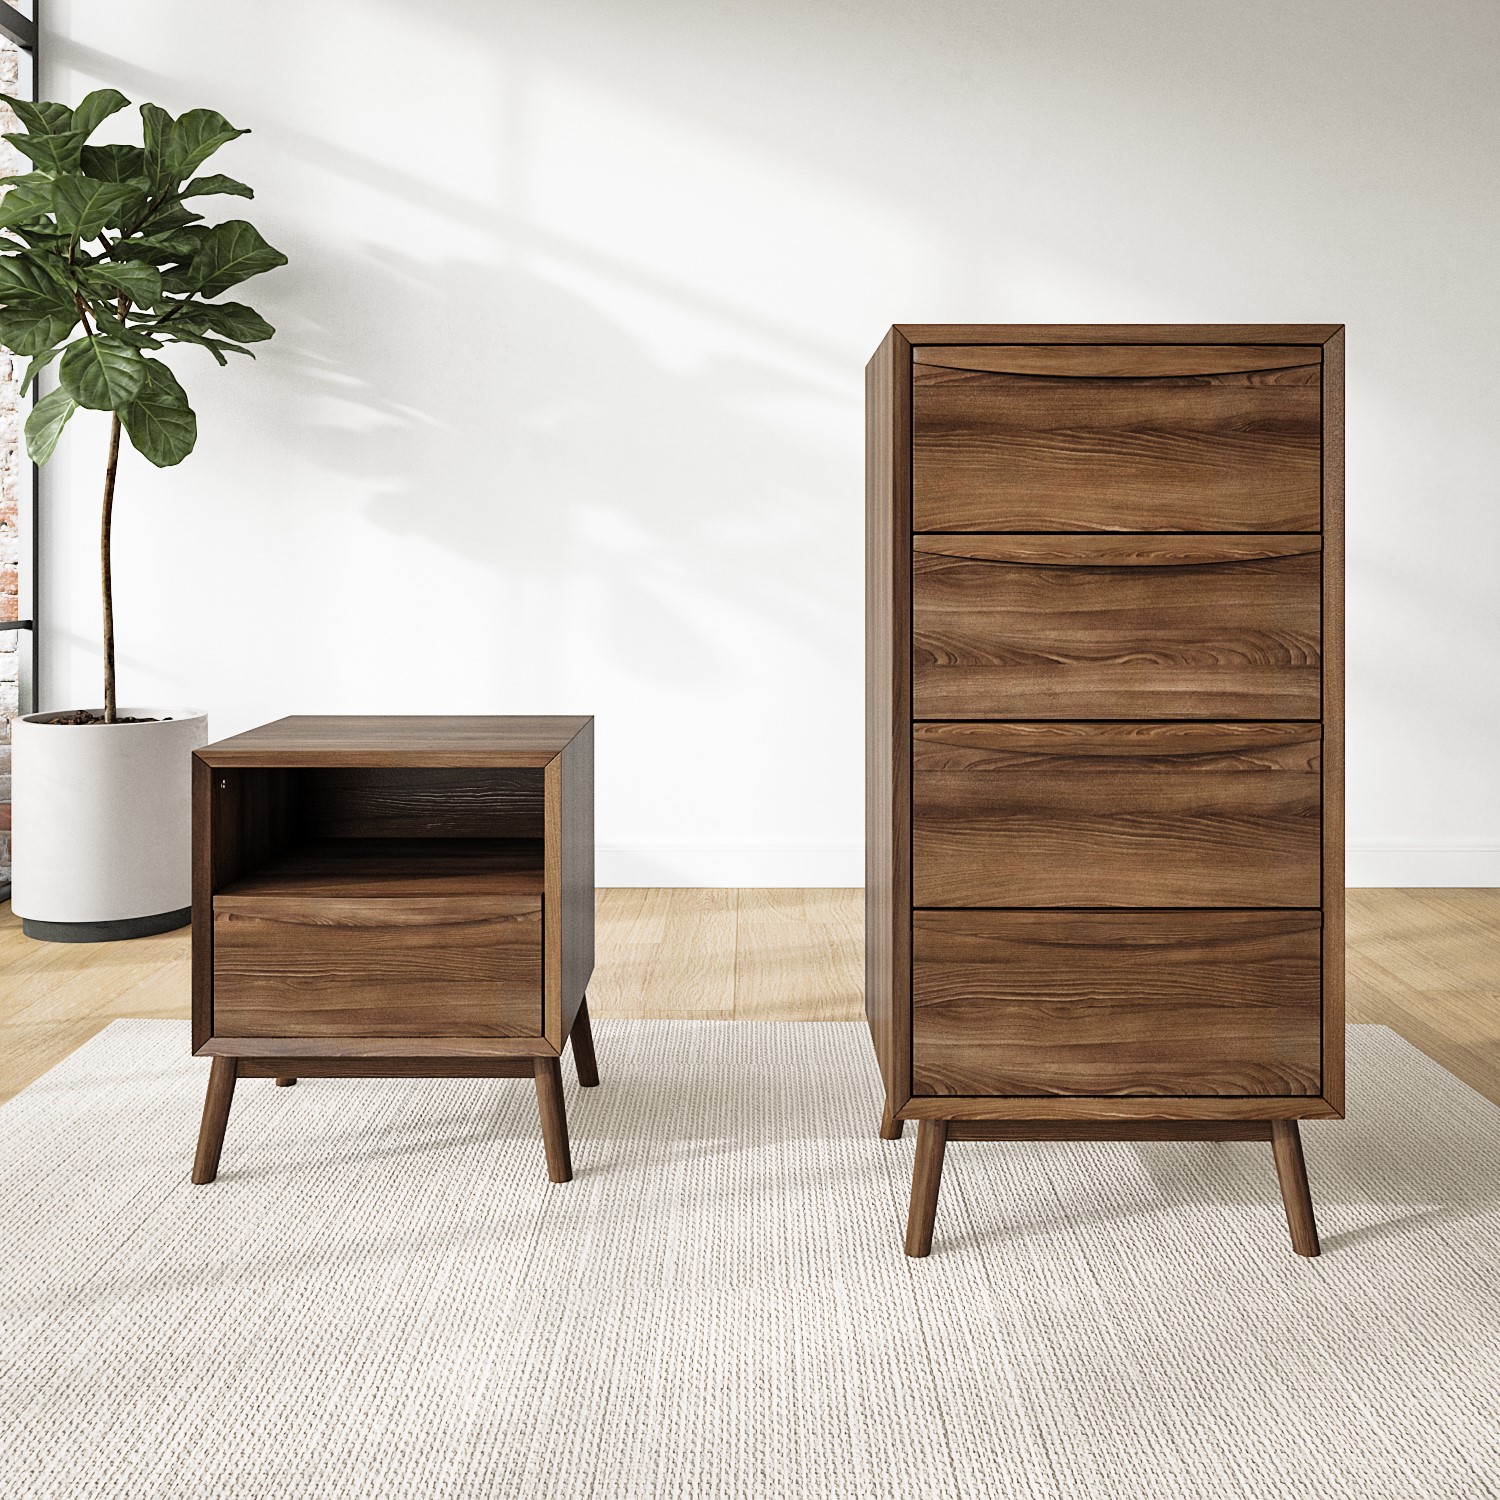 Photo of Walnut bedside table and tall chest of drawers set - frances